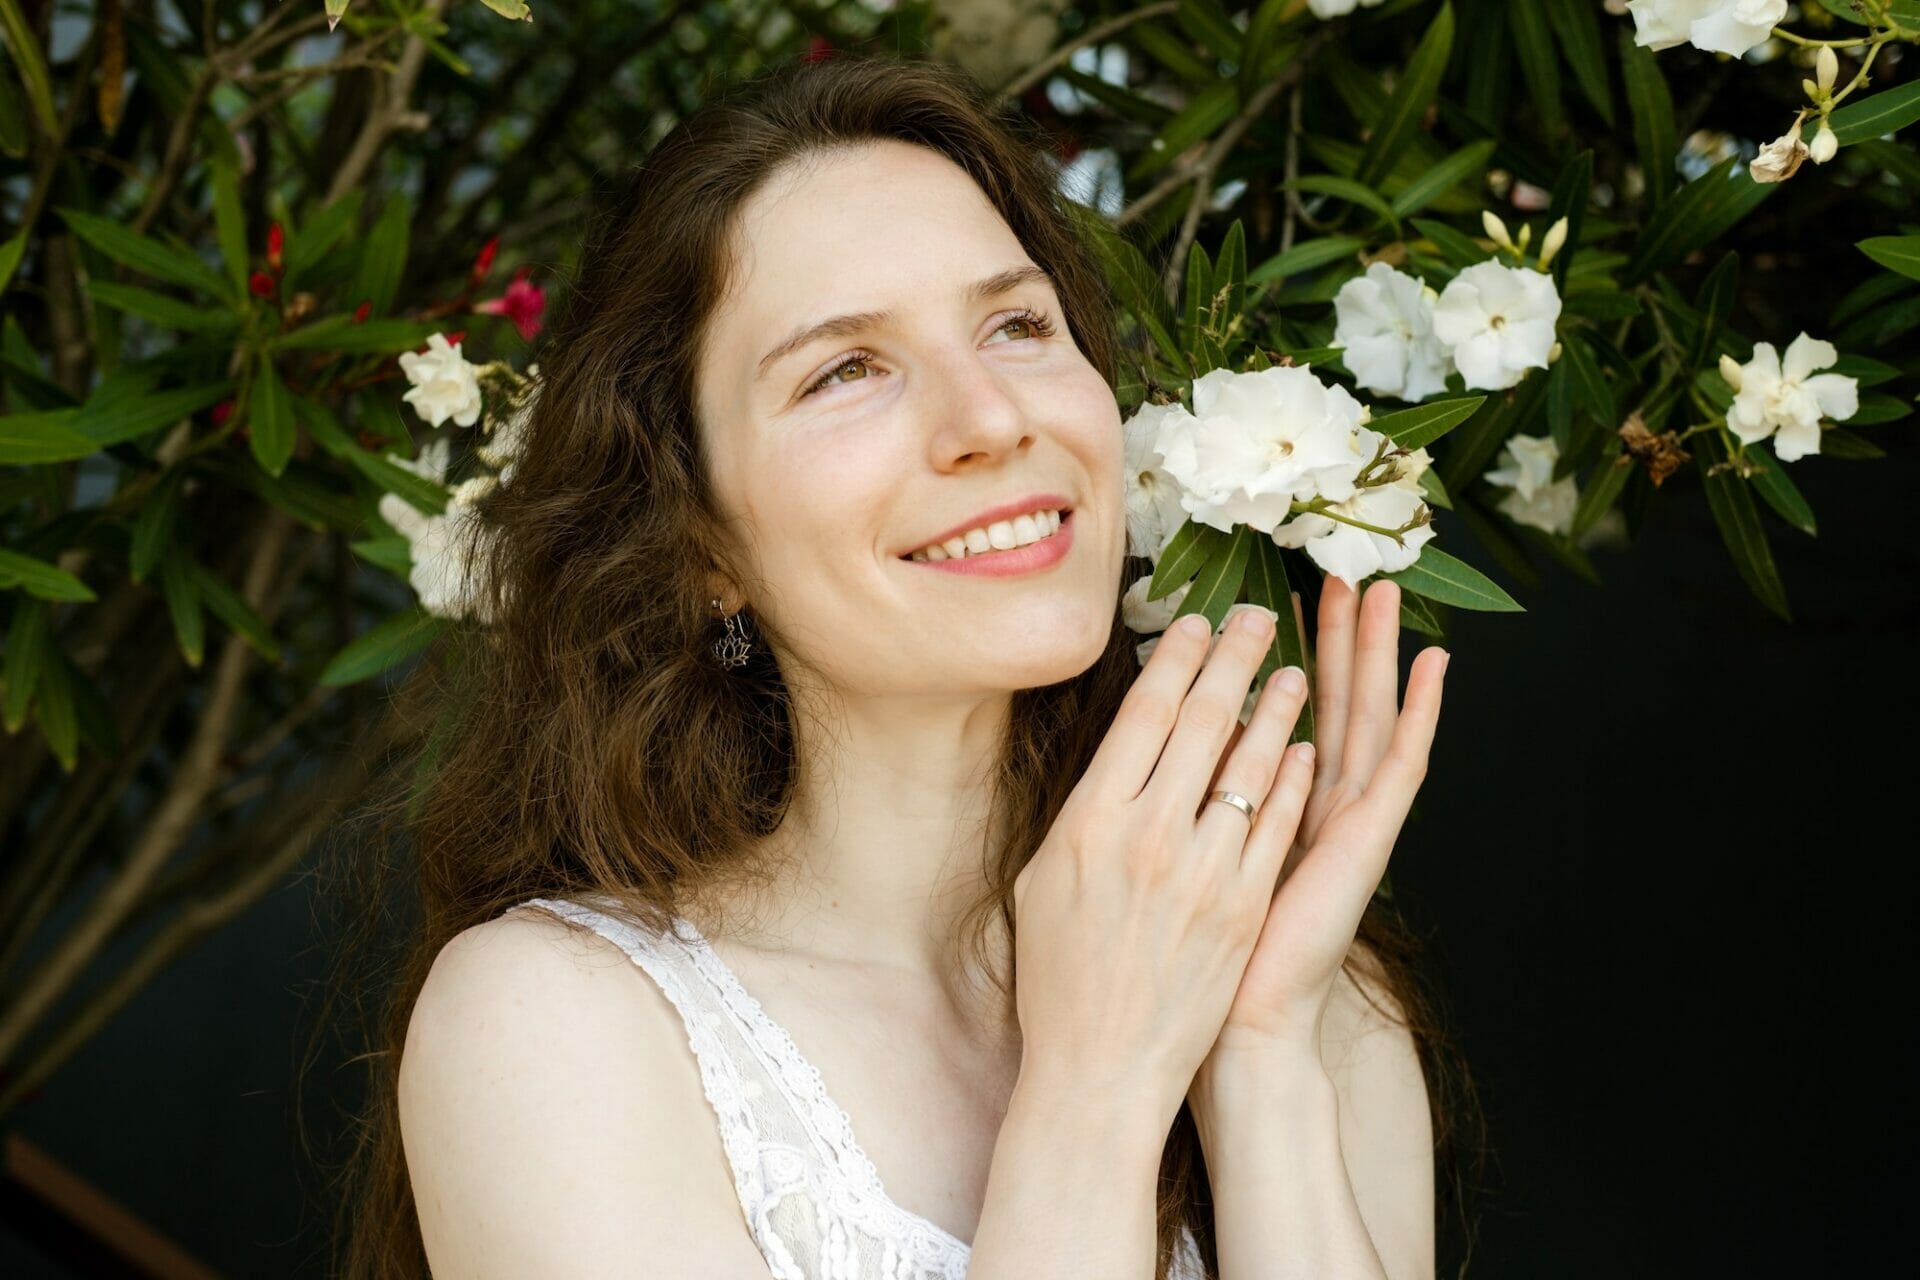 Close up female portrait of young woman with healthy tooth and glowing skin with blooming tree.